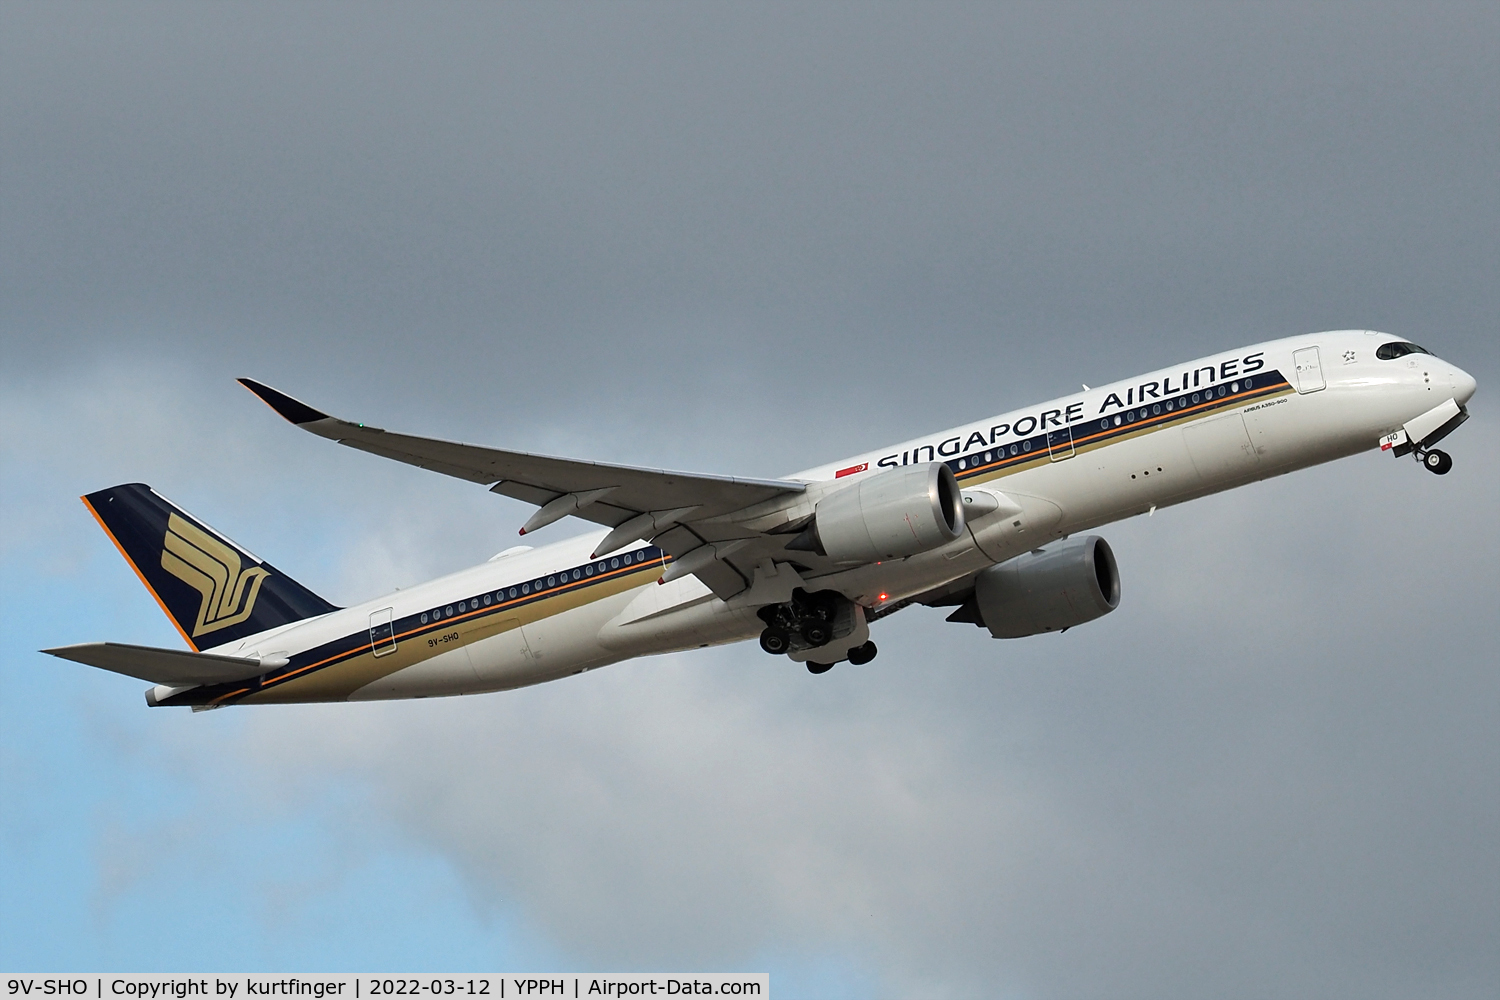 9V-SHO, 2020 Airbus A350-941 C/N 394, Airbus A350-900 cn 394. SIA 9V-SHO departed rwy 21 YPPH on 12 March 2022